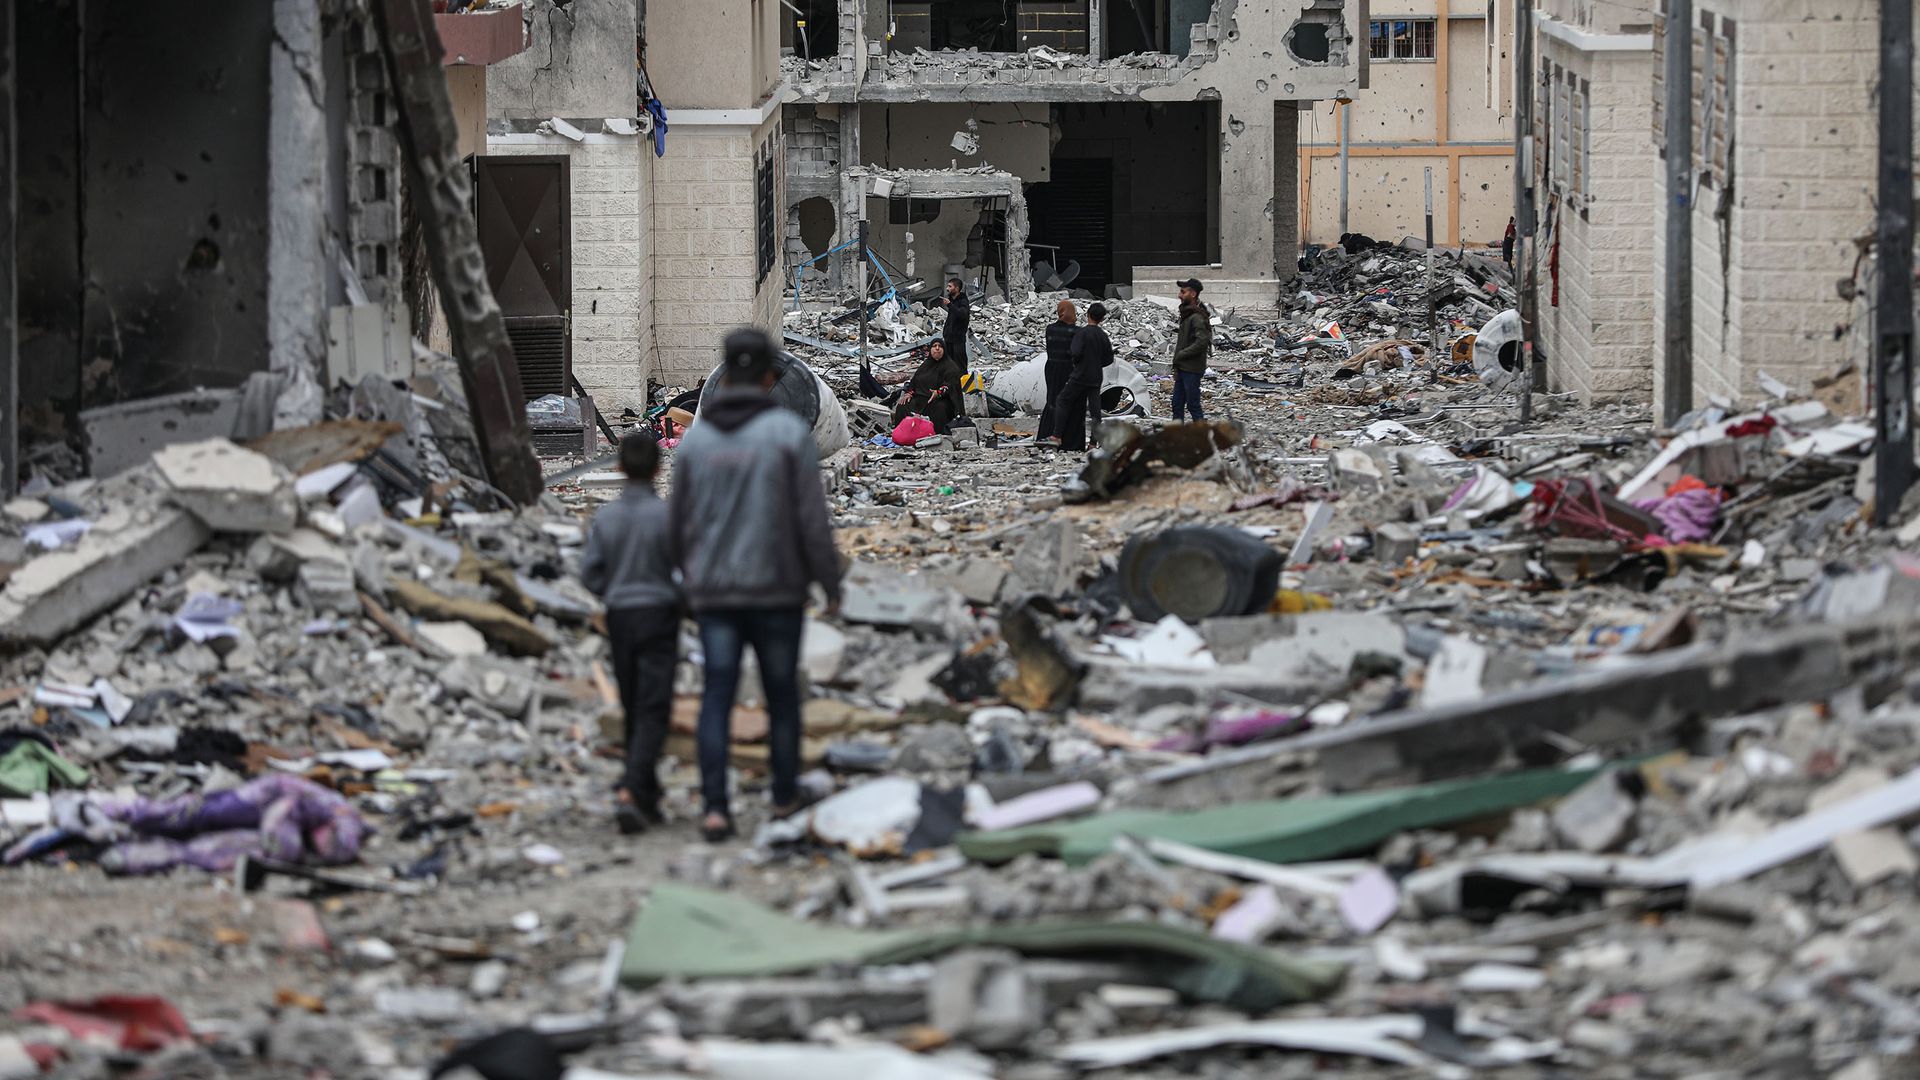 Palestinians walk among the rubble of residential buildings destroyed in Israel's bombardment in southeast Gaza on Nov. 28. Photo: Mustafa Hassona/Anadolu via Getty Images